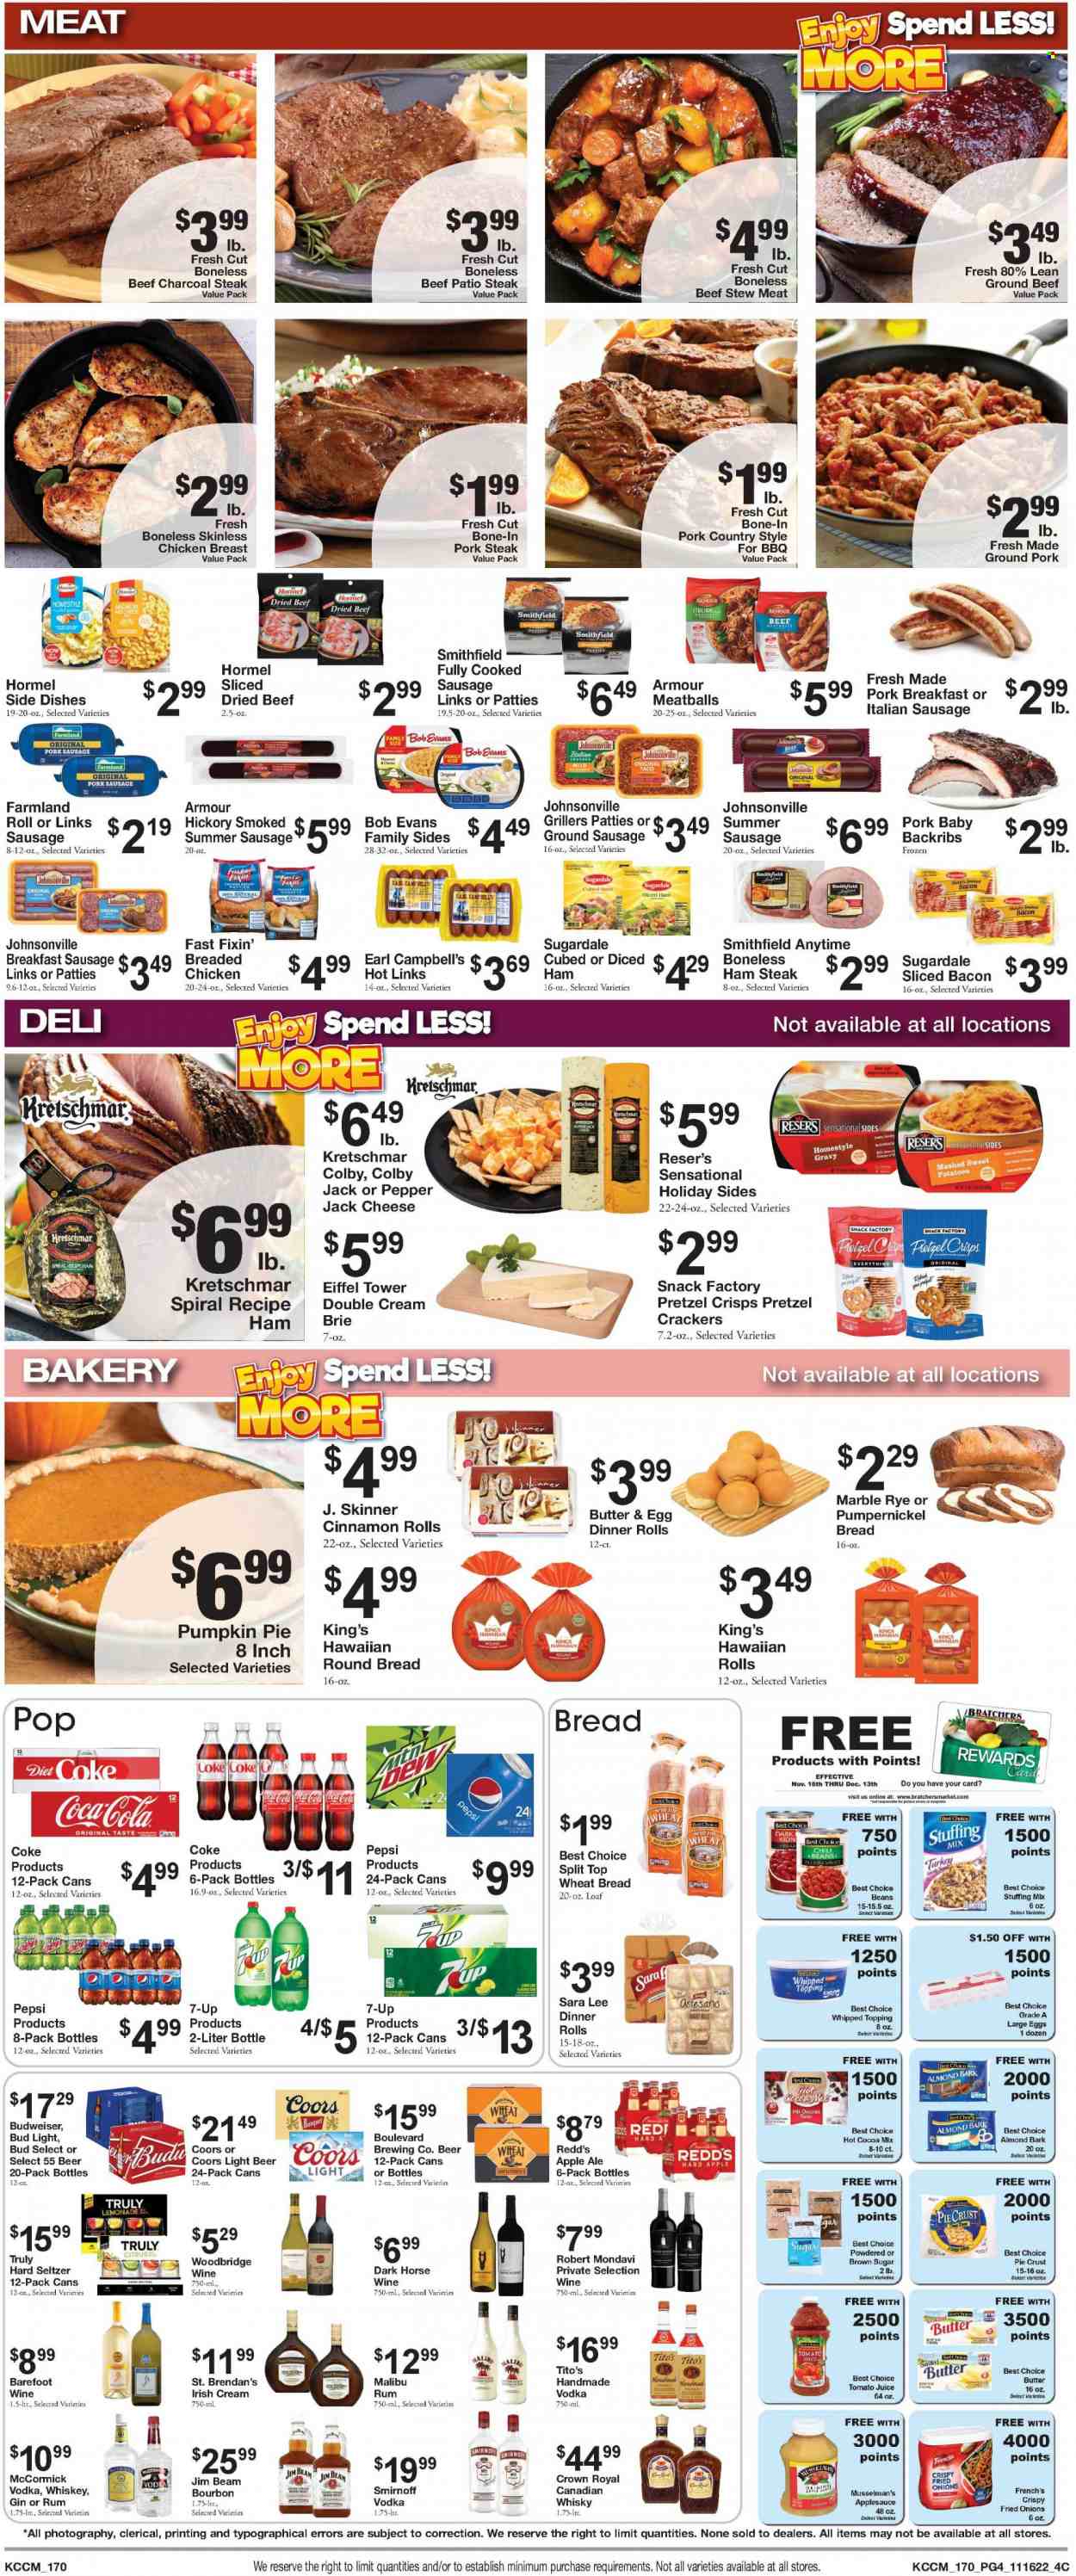 thumbnail - Bratchers Market Flyer - 11/16/2022 - 11/29/2022 - Sales products - stew meat, Fast Fixin', wheat bread, dinner rolls, Sara Lee, cinnamon roll, hawaiian rolls, beans, sweet potato, potatoes, Campbell's, macaroni & cheese, meatballs, nuggets, sauce, Bob Evans, Hormel, Sugardale, bacon, ham, Johnsonville, sausage, smoked sausage, summer sausage, pork sausage, italian sausage, ham steaks, Colby cheese, Pepper Jack cheese, brie, large eggs, butter, milk chocolate, chocolate, snack, crackers, pretzel crisps, stuffing mix, pie crust, topping, chili beans, Skinner Pasta, homestyle gravy, chilli sauce, apple sauce, Coca-Cola, lemonade, tomato juice, Pepsi, juice, Diet Coke, 7UP, hot cocoa, Woodbridge, bourbon, canadian whisky, gin, rum, Smirnoff, vodka, whiskey, irish cream, Malibu, Jim Beam, Hard Seltzer, TRULY, whisky, beer, Bud Light, beef meat, ground beef, steak, ground pork, pork chops, pork meat, Budweiser, Coors. Page 4.